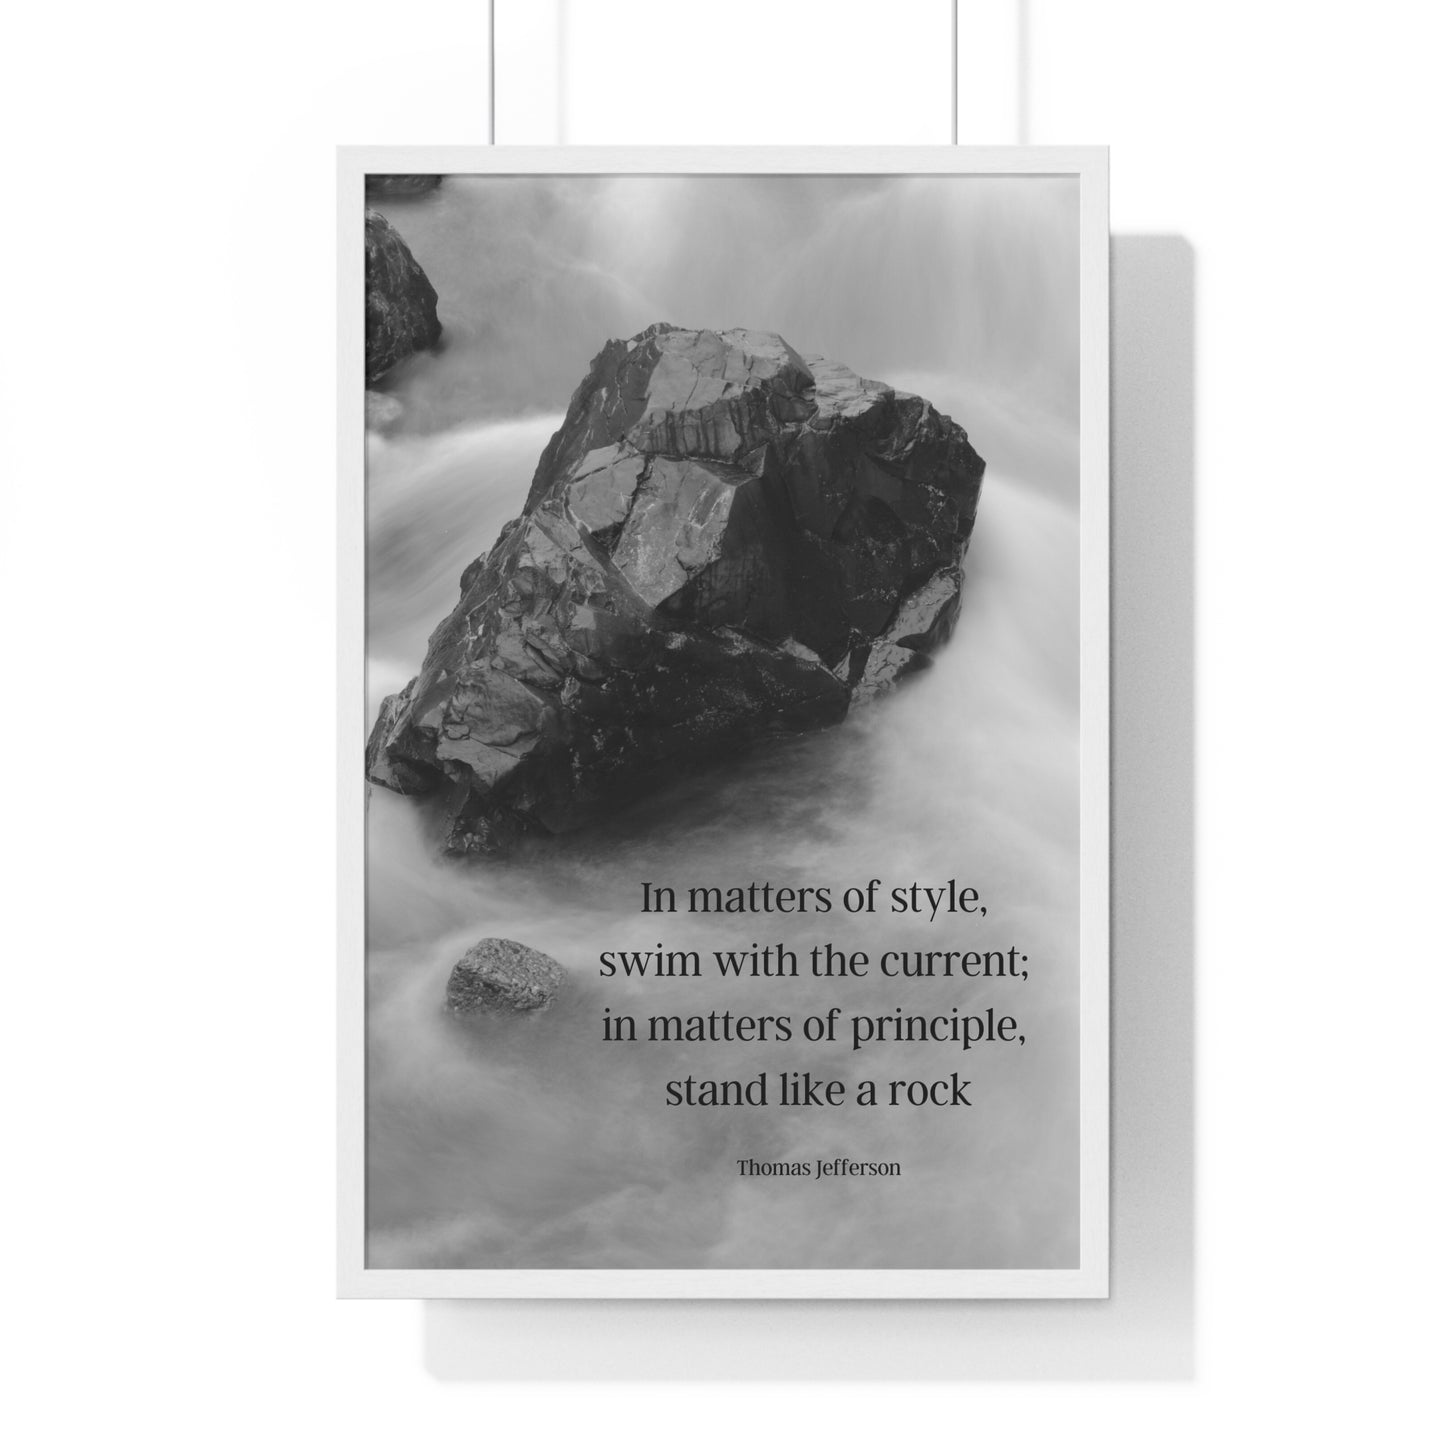 Thomas Jefferson Quote 2, Poster Art, Stand Like a Rock Print, River, Nature, 3rd President of the United States, American Patriots, AI Art, Political Art, Presidential Quotes, Inspirational Quotes